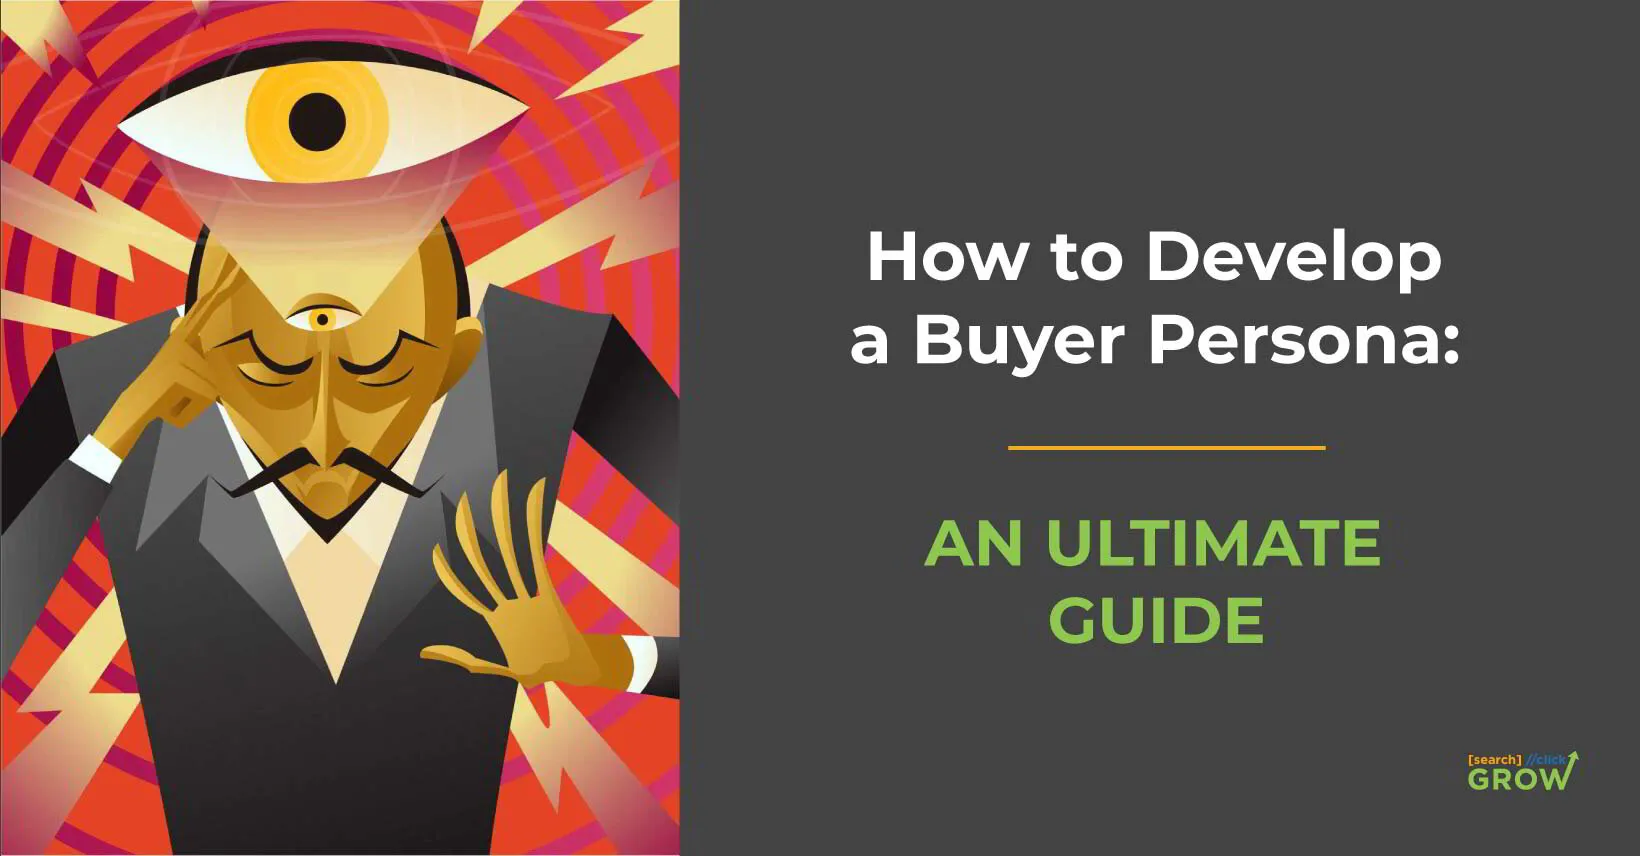 How to Develop Buyer Personas: An Ultimate Guide